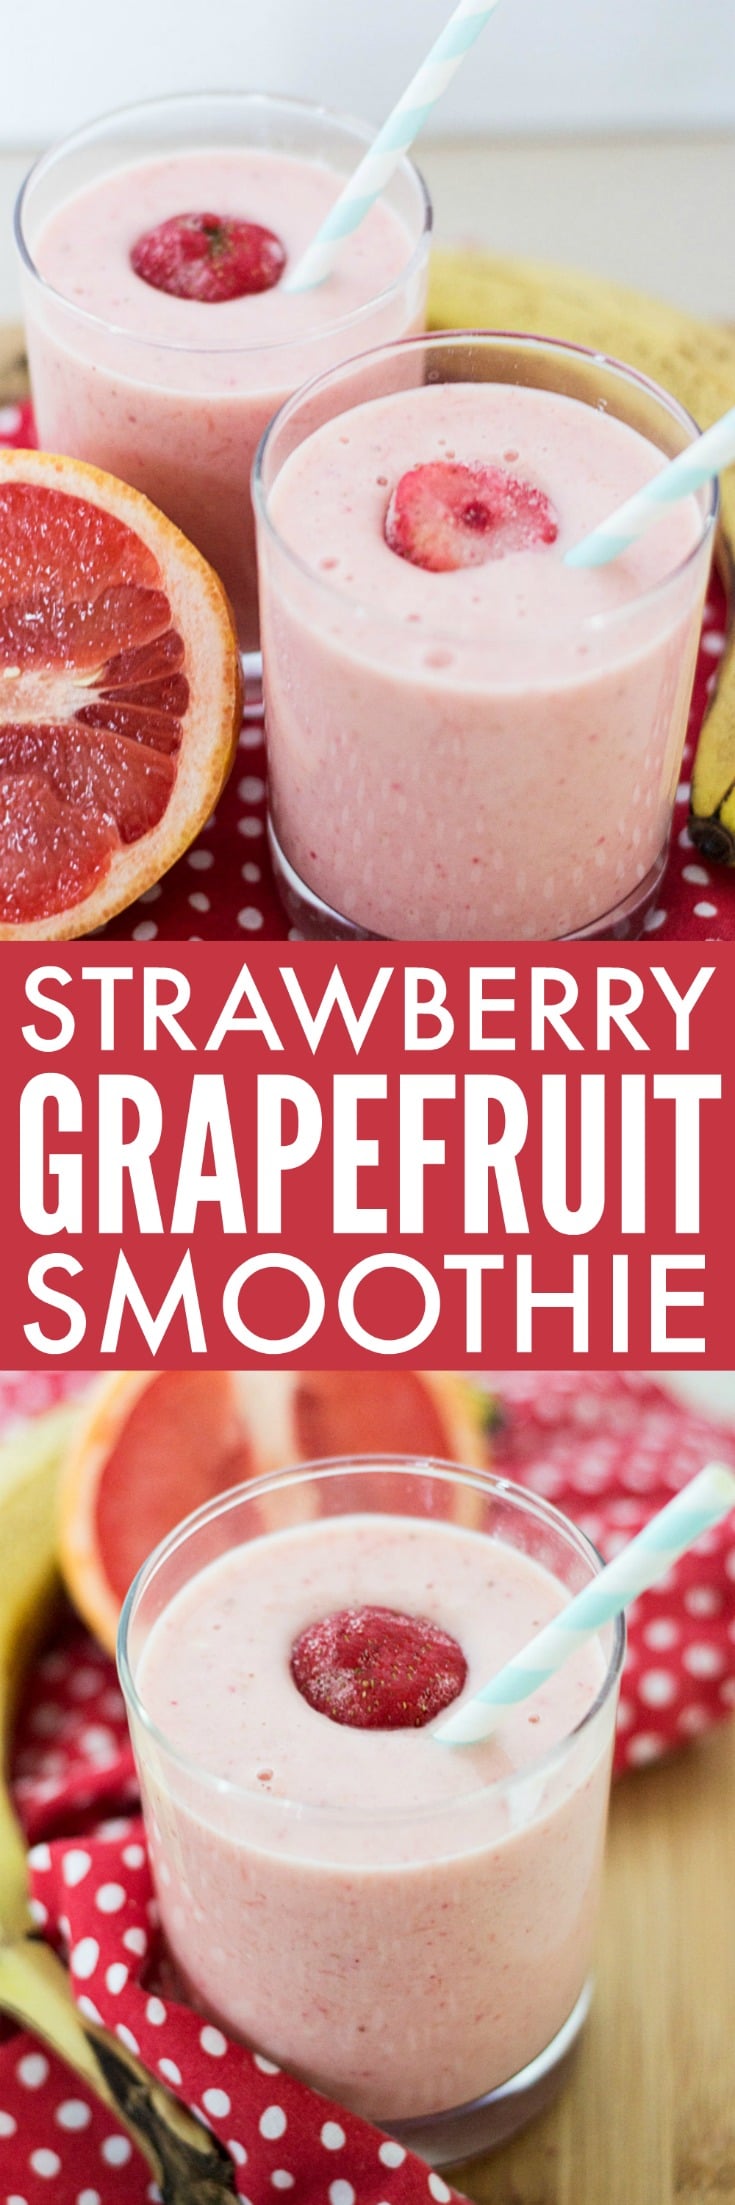 Our Strawberry Grapefruit Smoothie is both sweet and tart, making it a refreshing pick-me-up to start your morning.